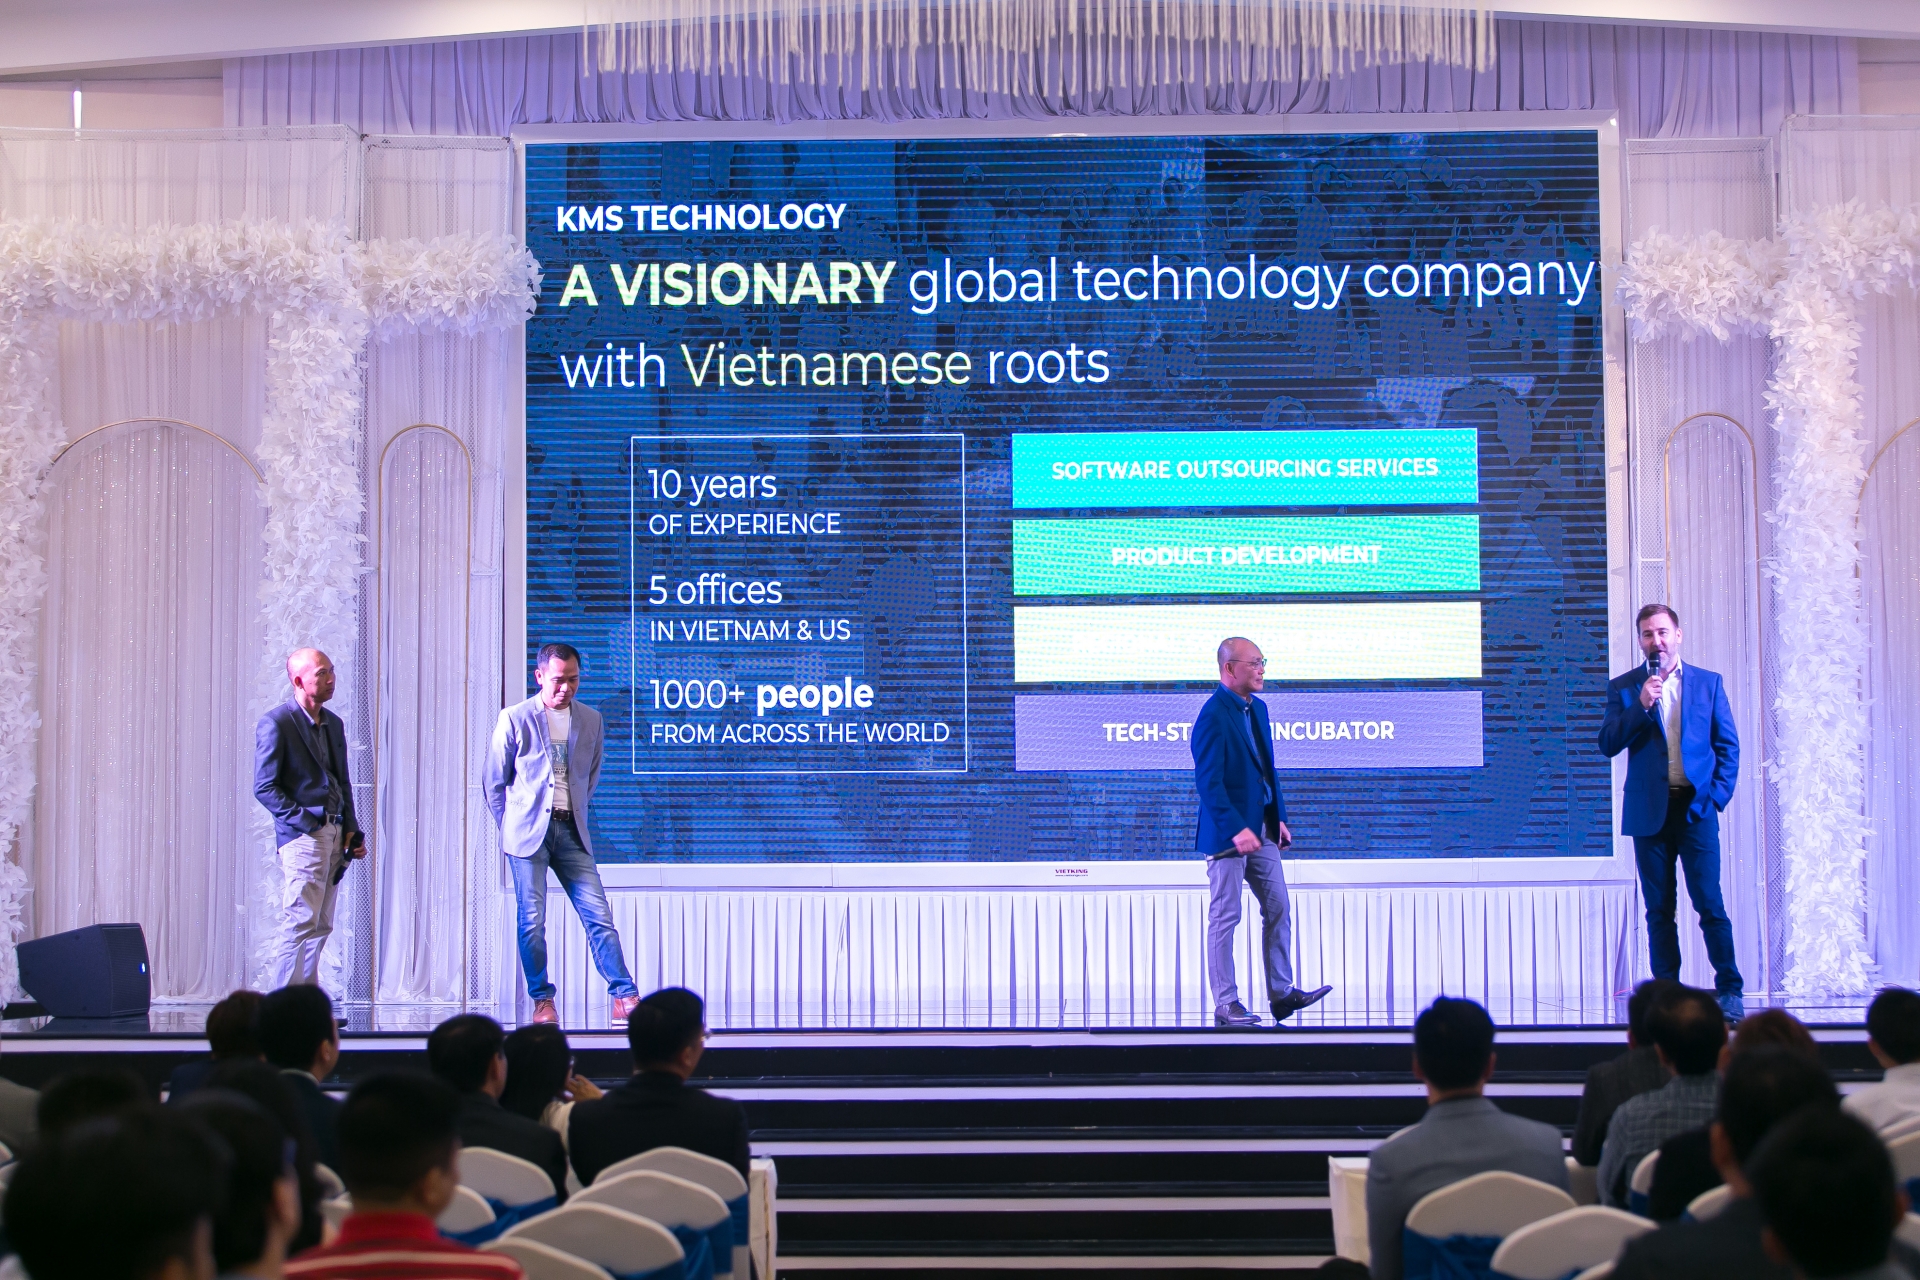 KMS Technology expands reach to Asia with Vietnam in focus